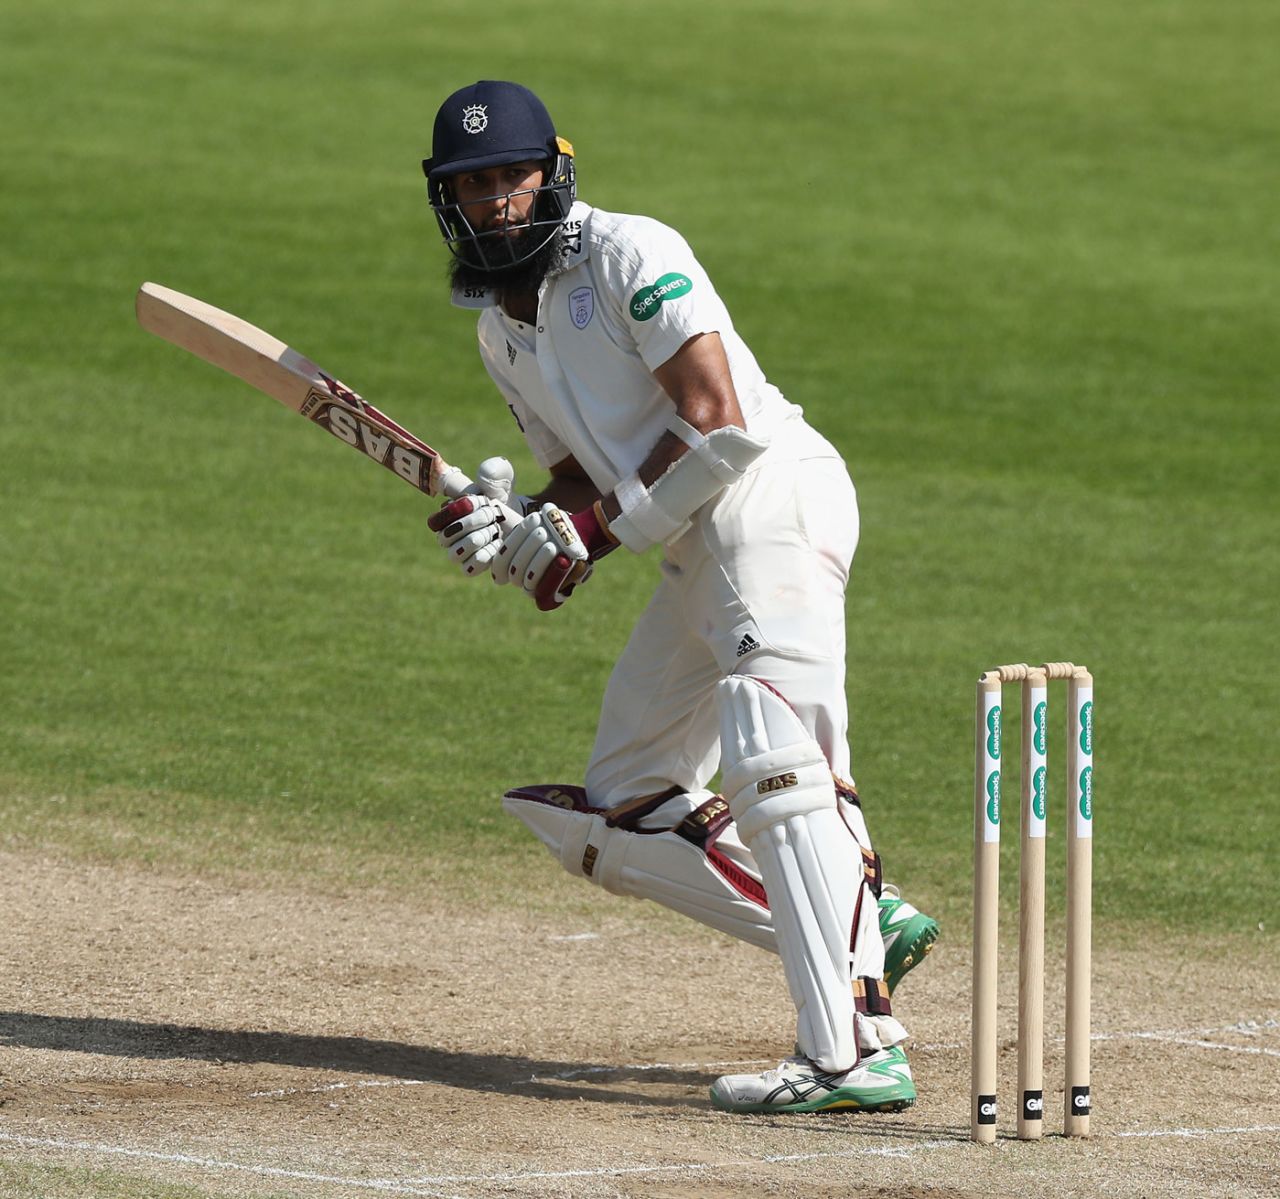 Hashim Amla was central to his side's hopes, Nottinghamshire v Hampshire, County Championship, Division One, Trent Bridge, 4th day, May 7, 2018